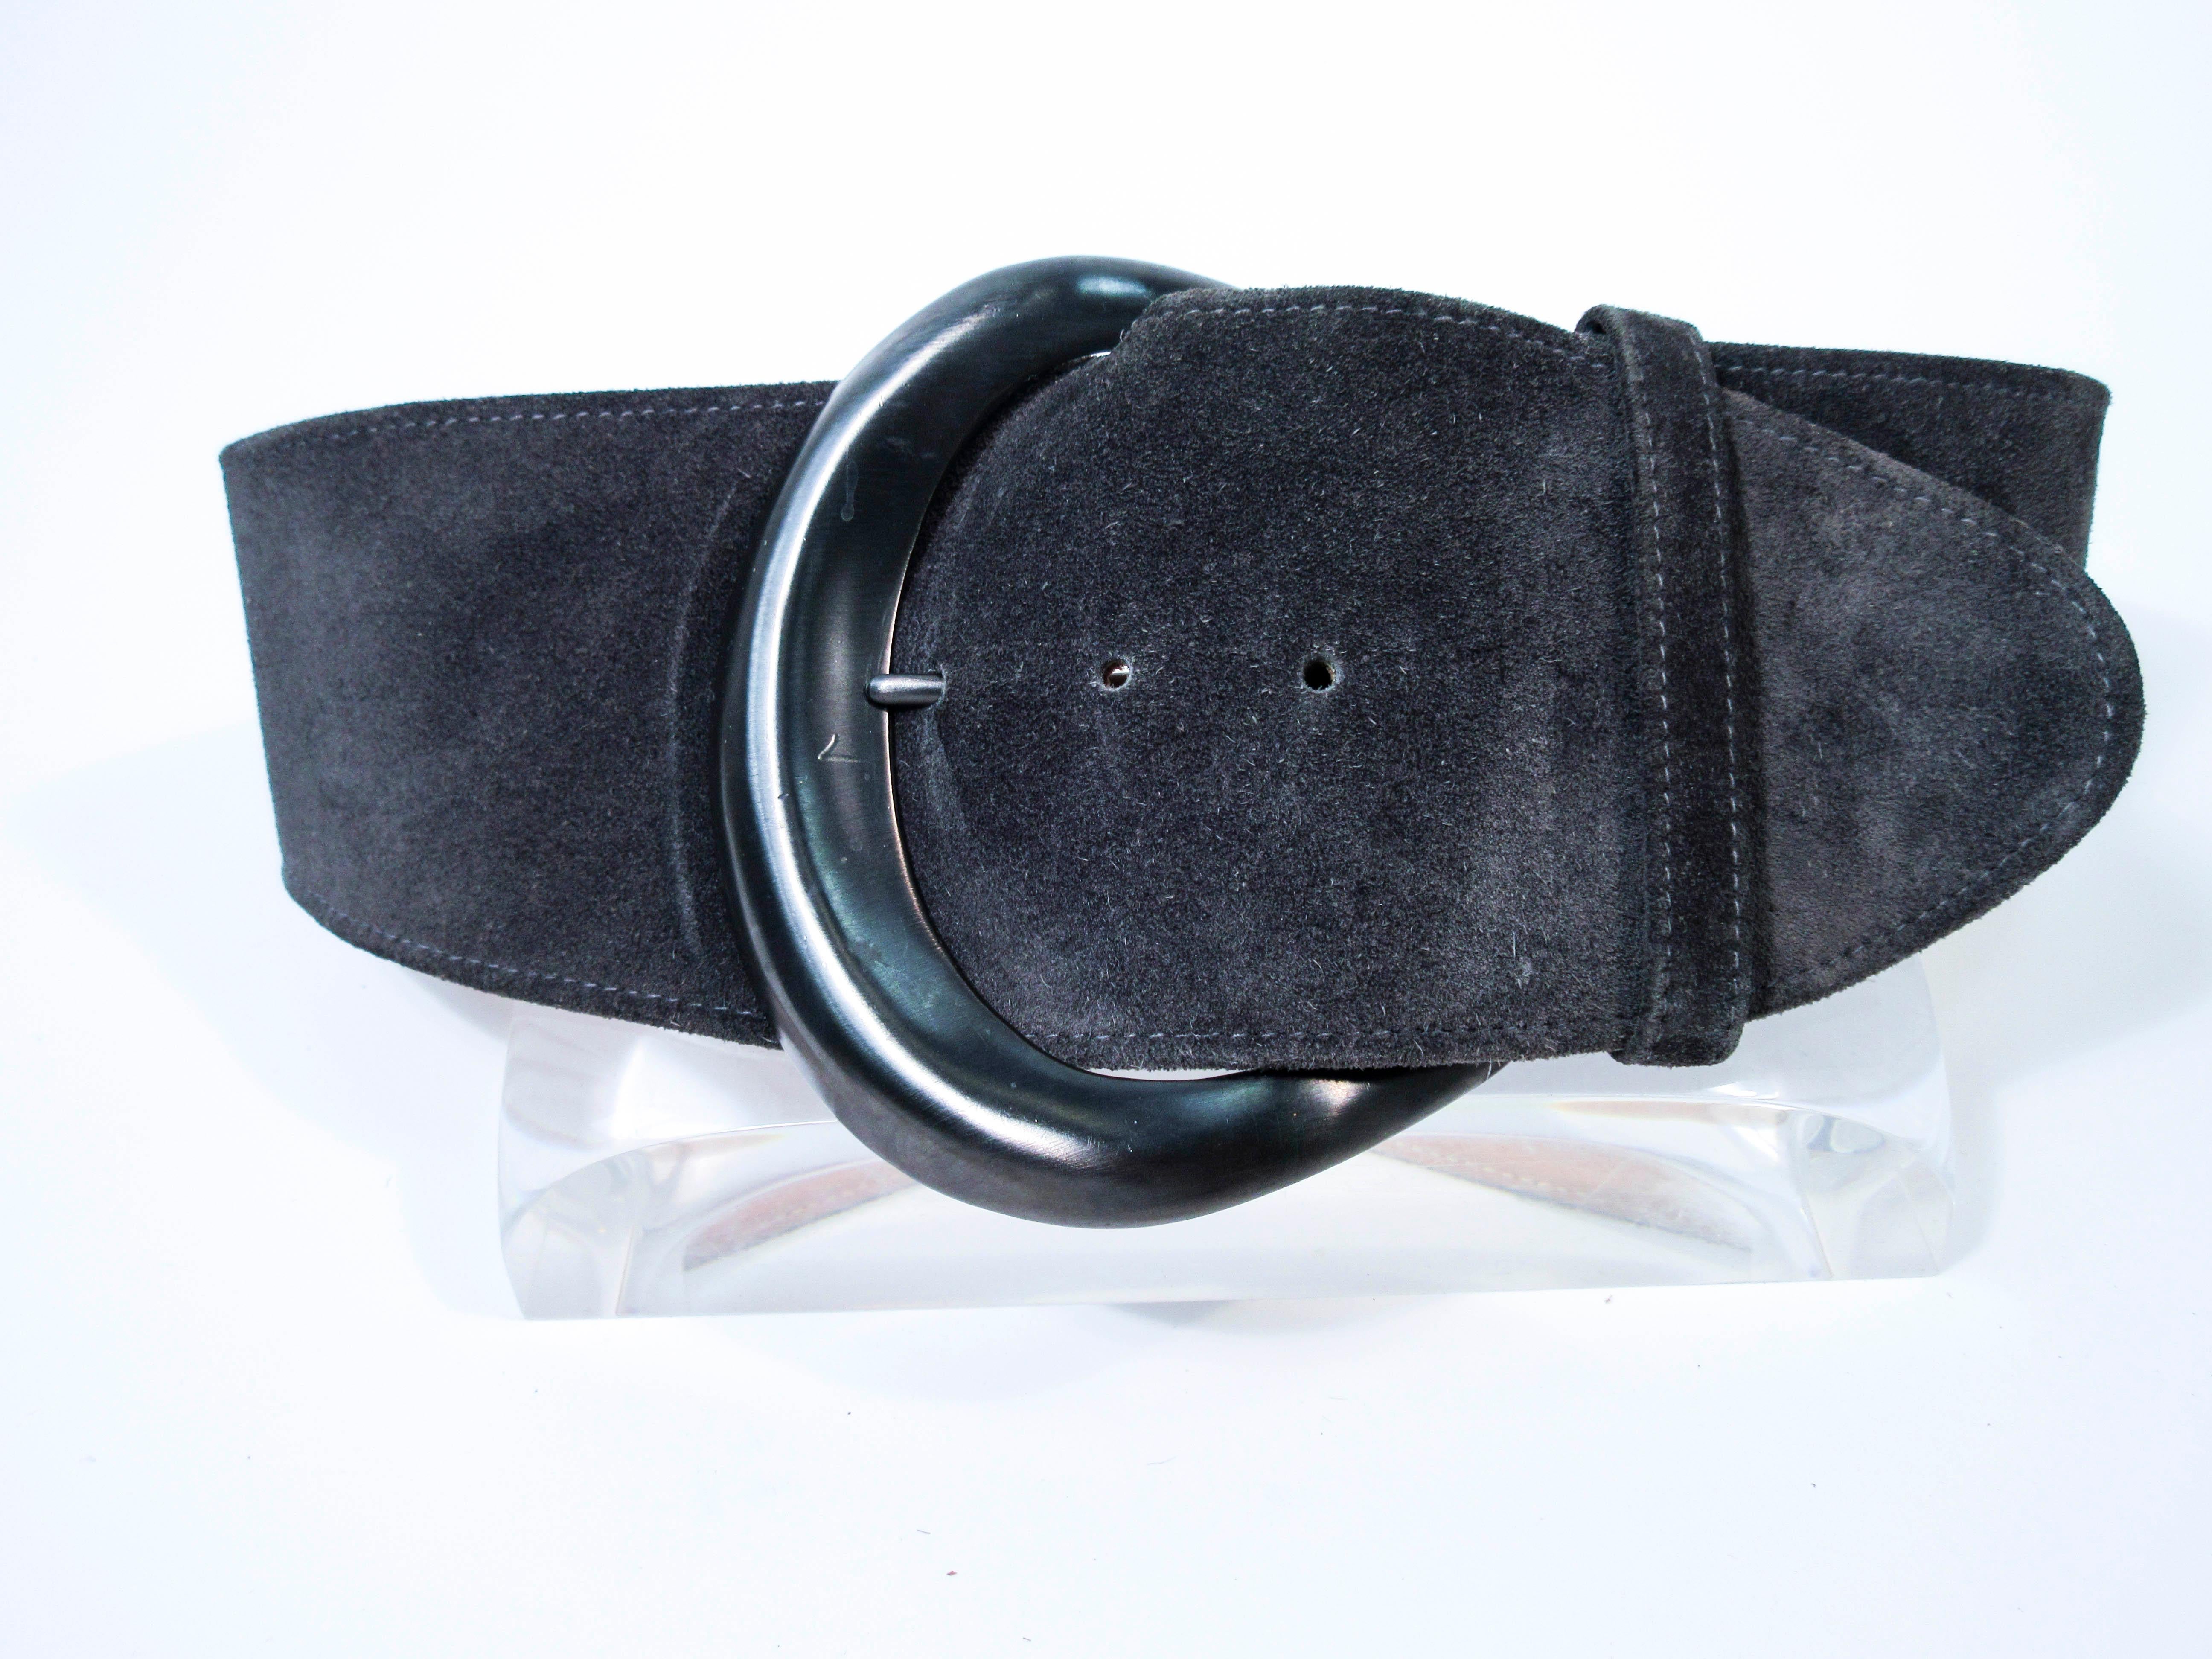 This vintage Donna Karan belt is composed of a grey suede with large gunmetal hue buckle. Features a classic wide style high waist style. This is a fantastic statement piece and excellent addition to any collectors wardrobe. In excellent pre-owned